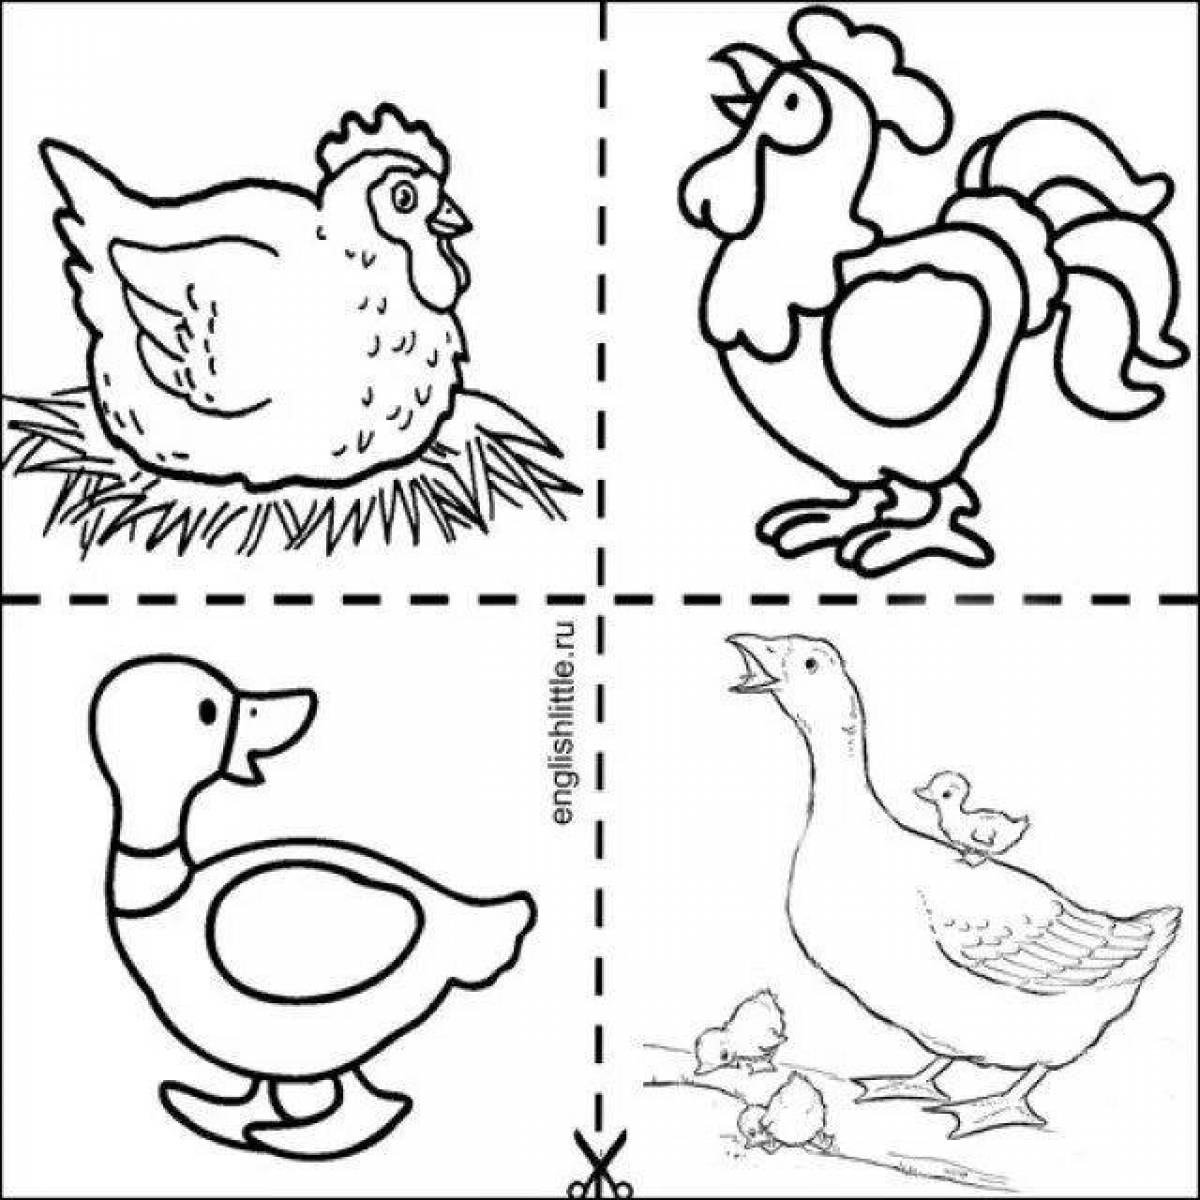 Exciting bird coloring page for kids